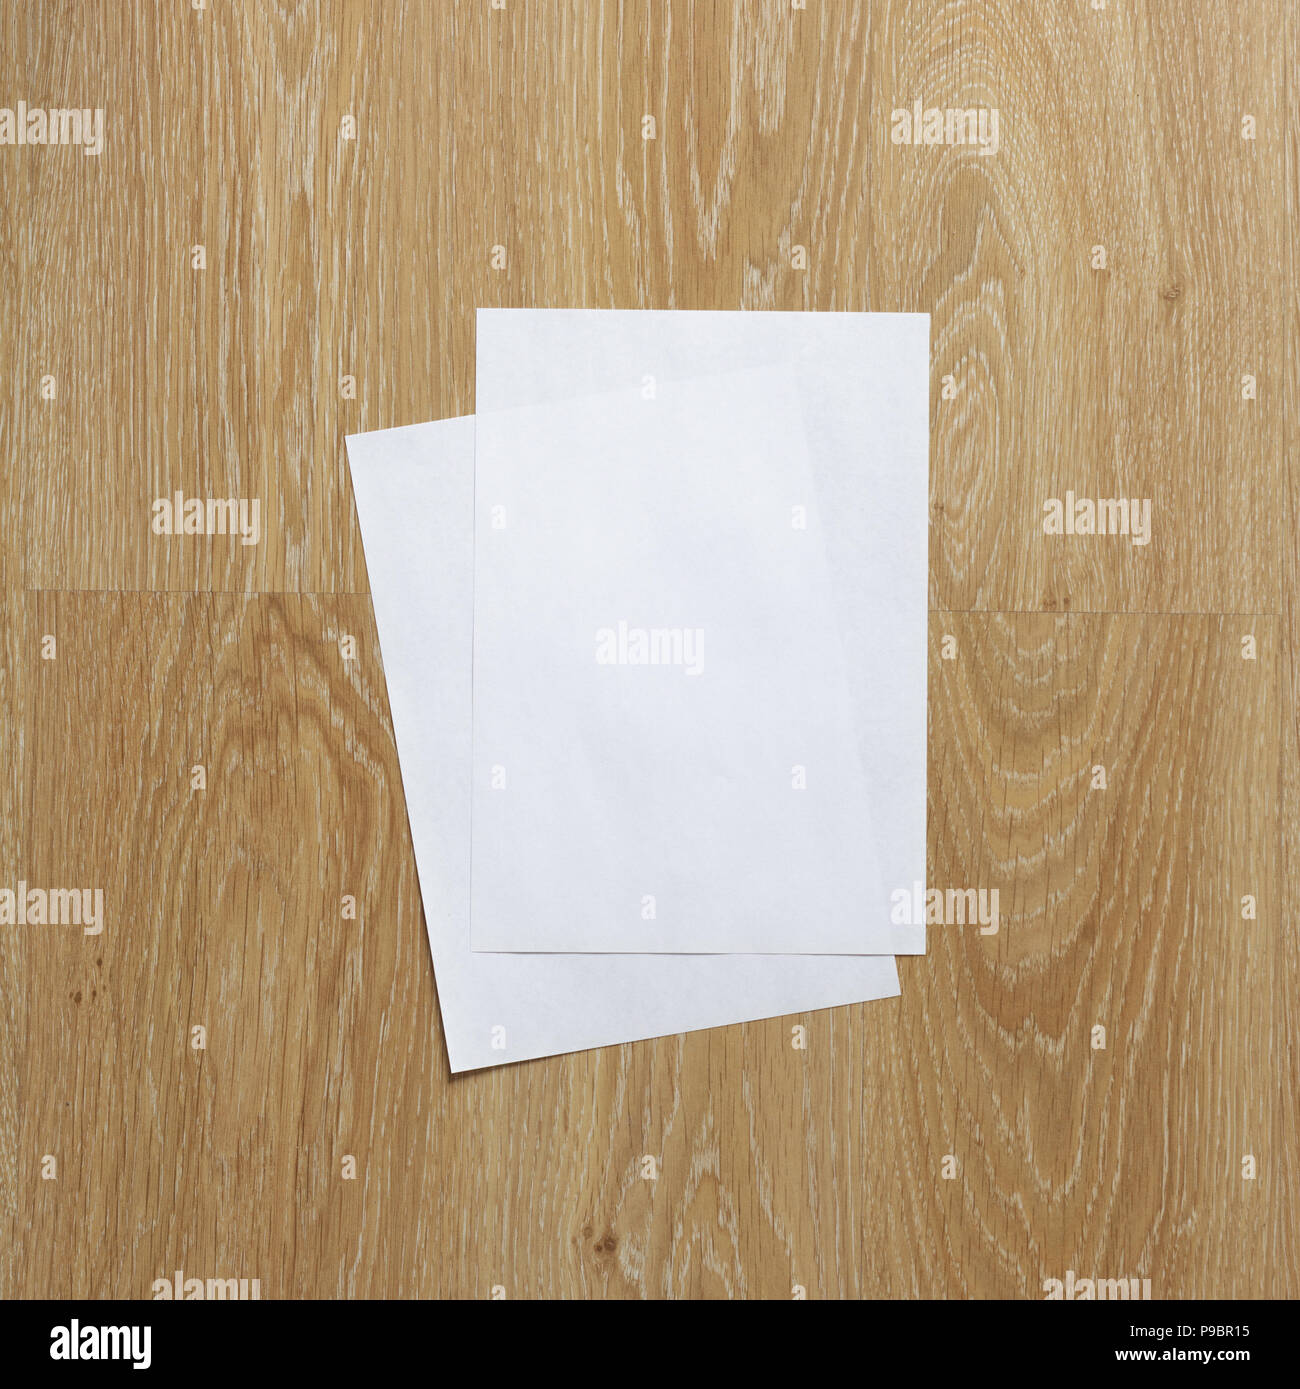 Two of blank sheets of paper portrait orientation on wooden background Stock Photo